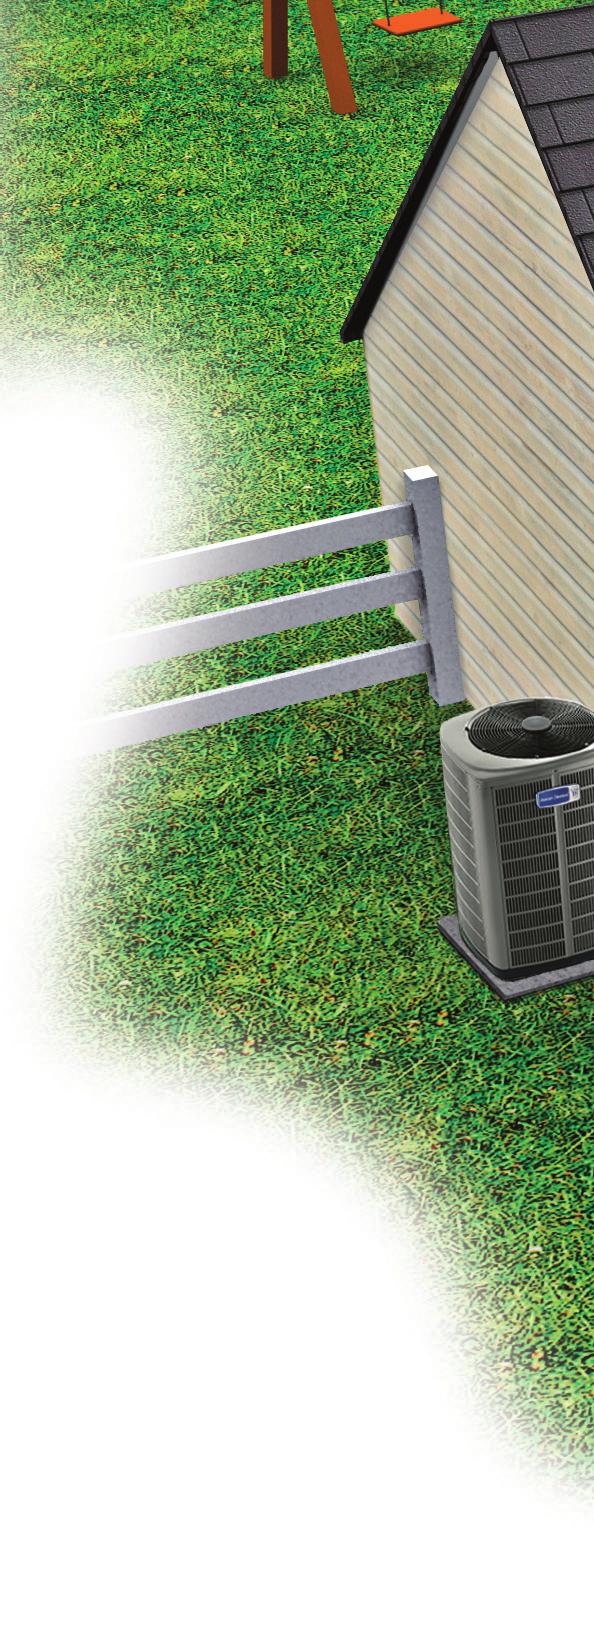 1 Humidifier AccuLink Zoning Carefully controls moisture levels in your air during dry